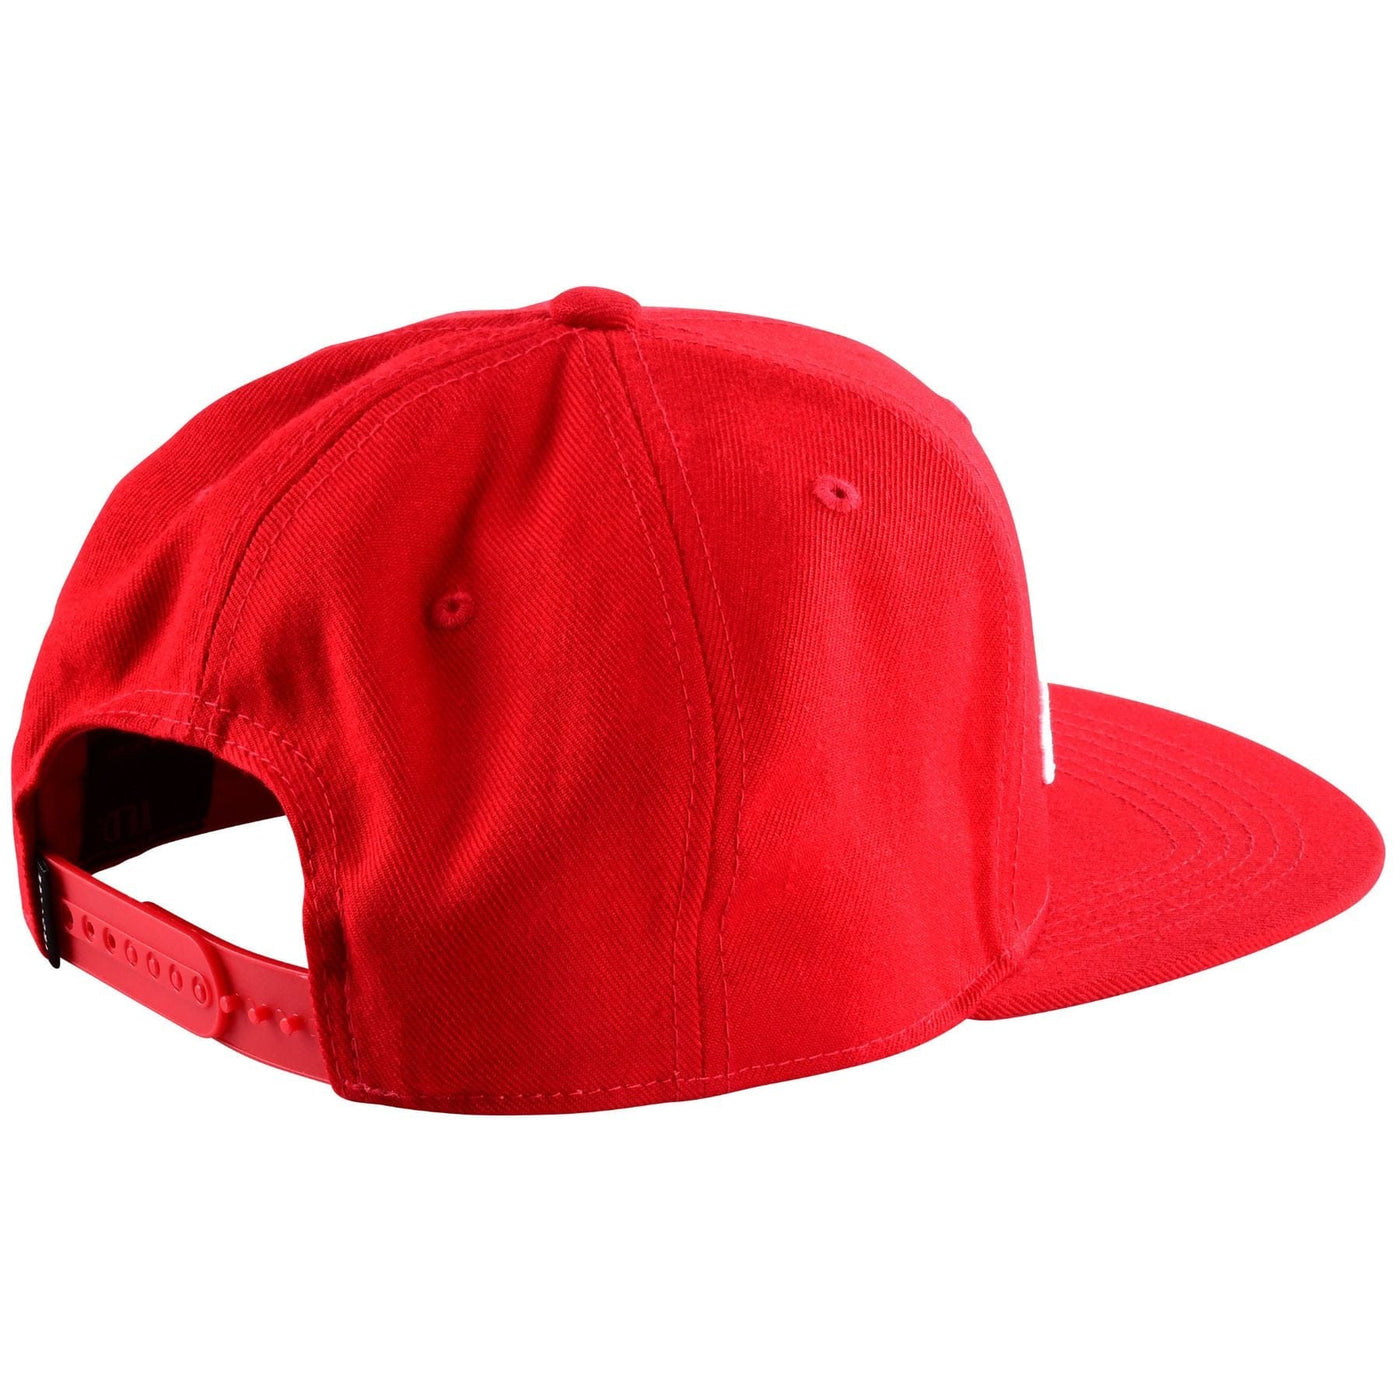 Troy Lee Designs 9FIFTY Signature Snapback Hat - Red/White